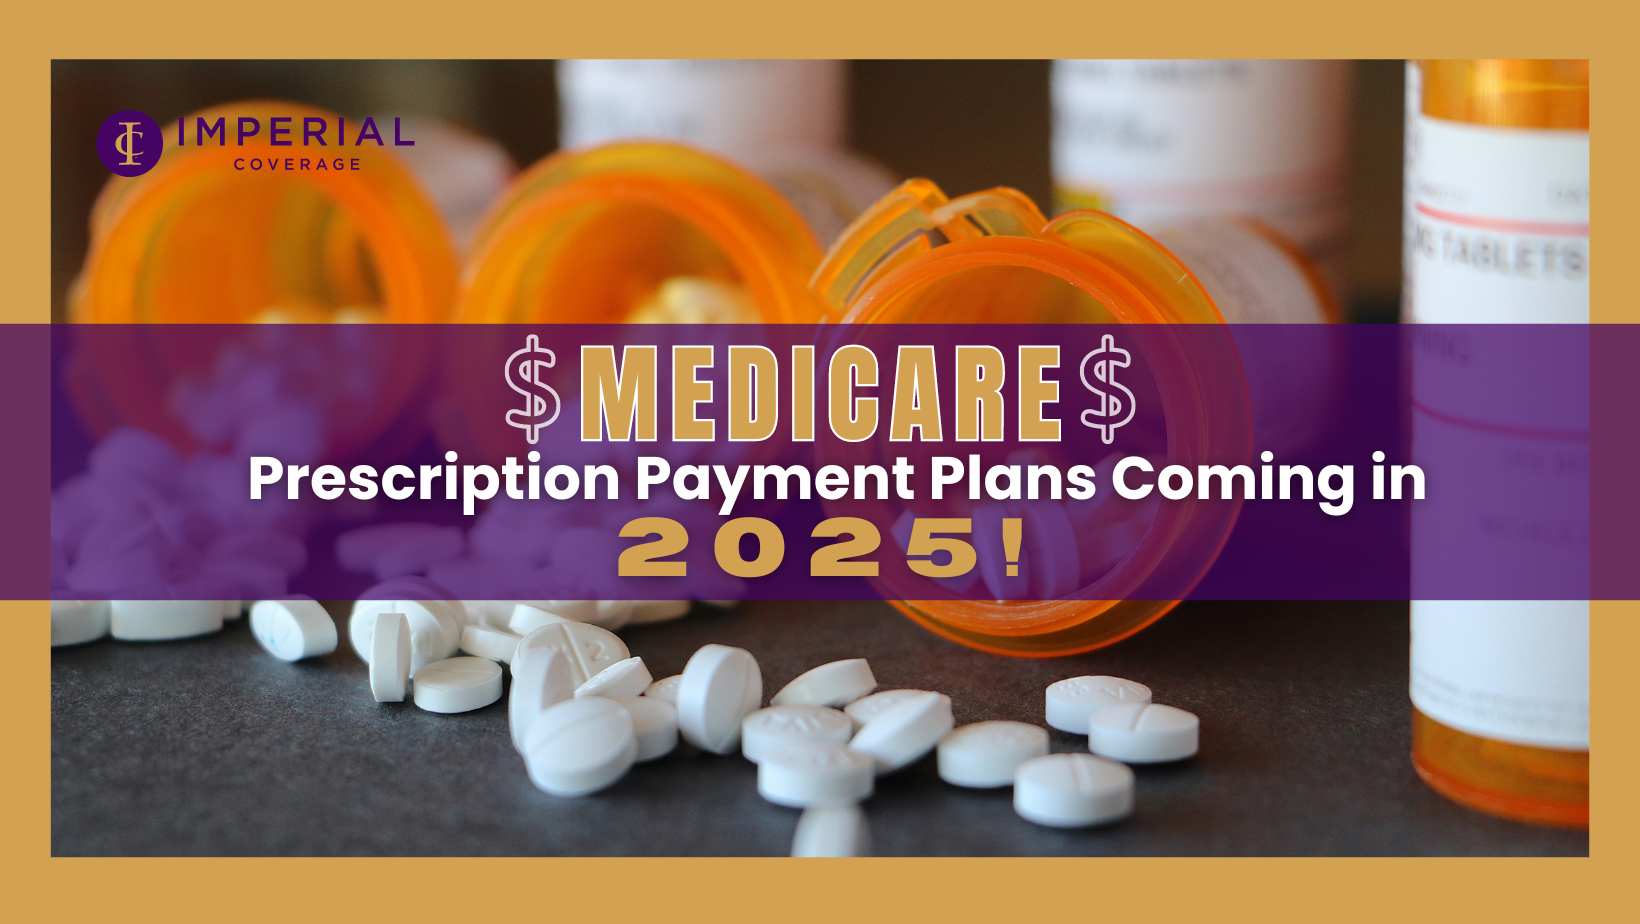 Simplify Your Medicare Part D Costs with the 2025 Prescription Payment Plan!